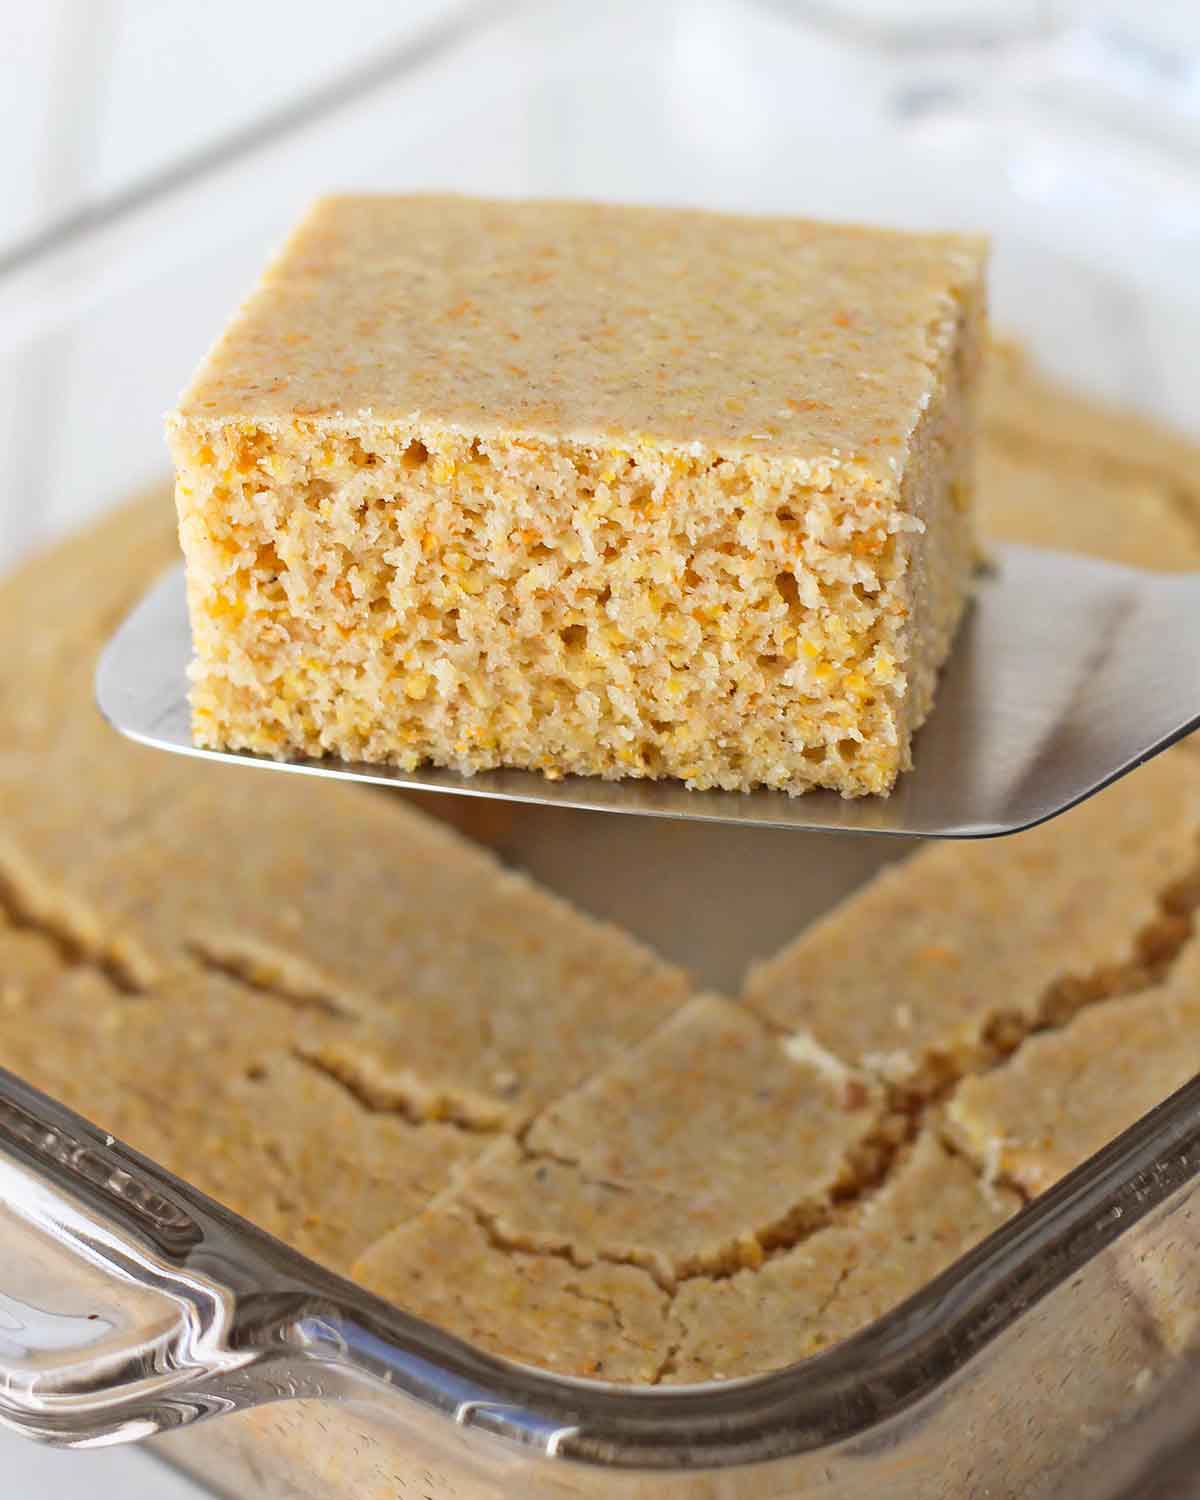 A square slice of eggless cornbread lifted out of the baking dish with a metal spatula.